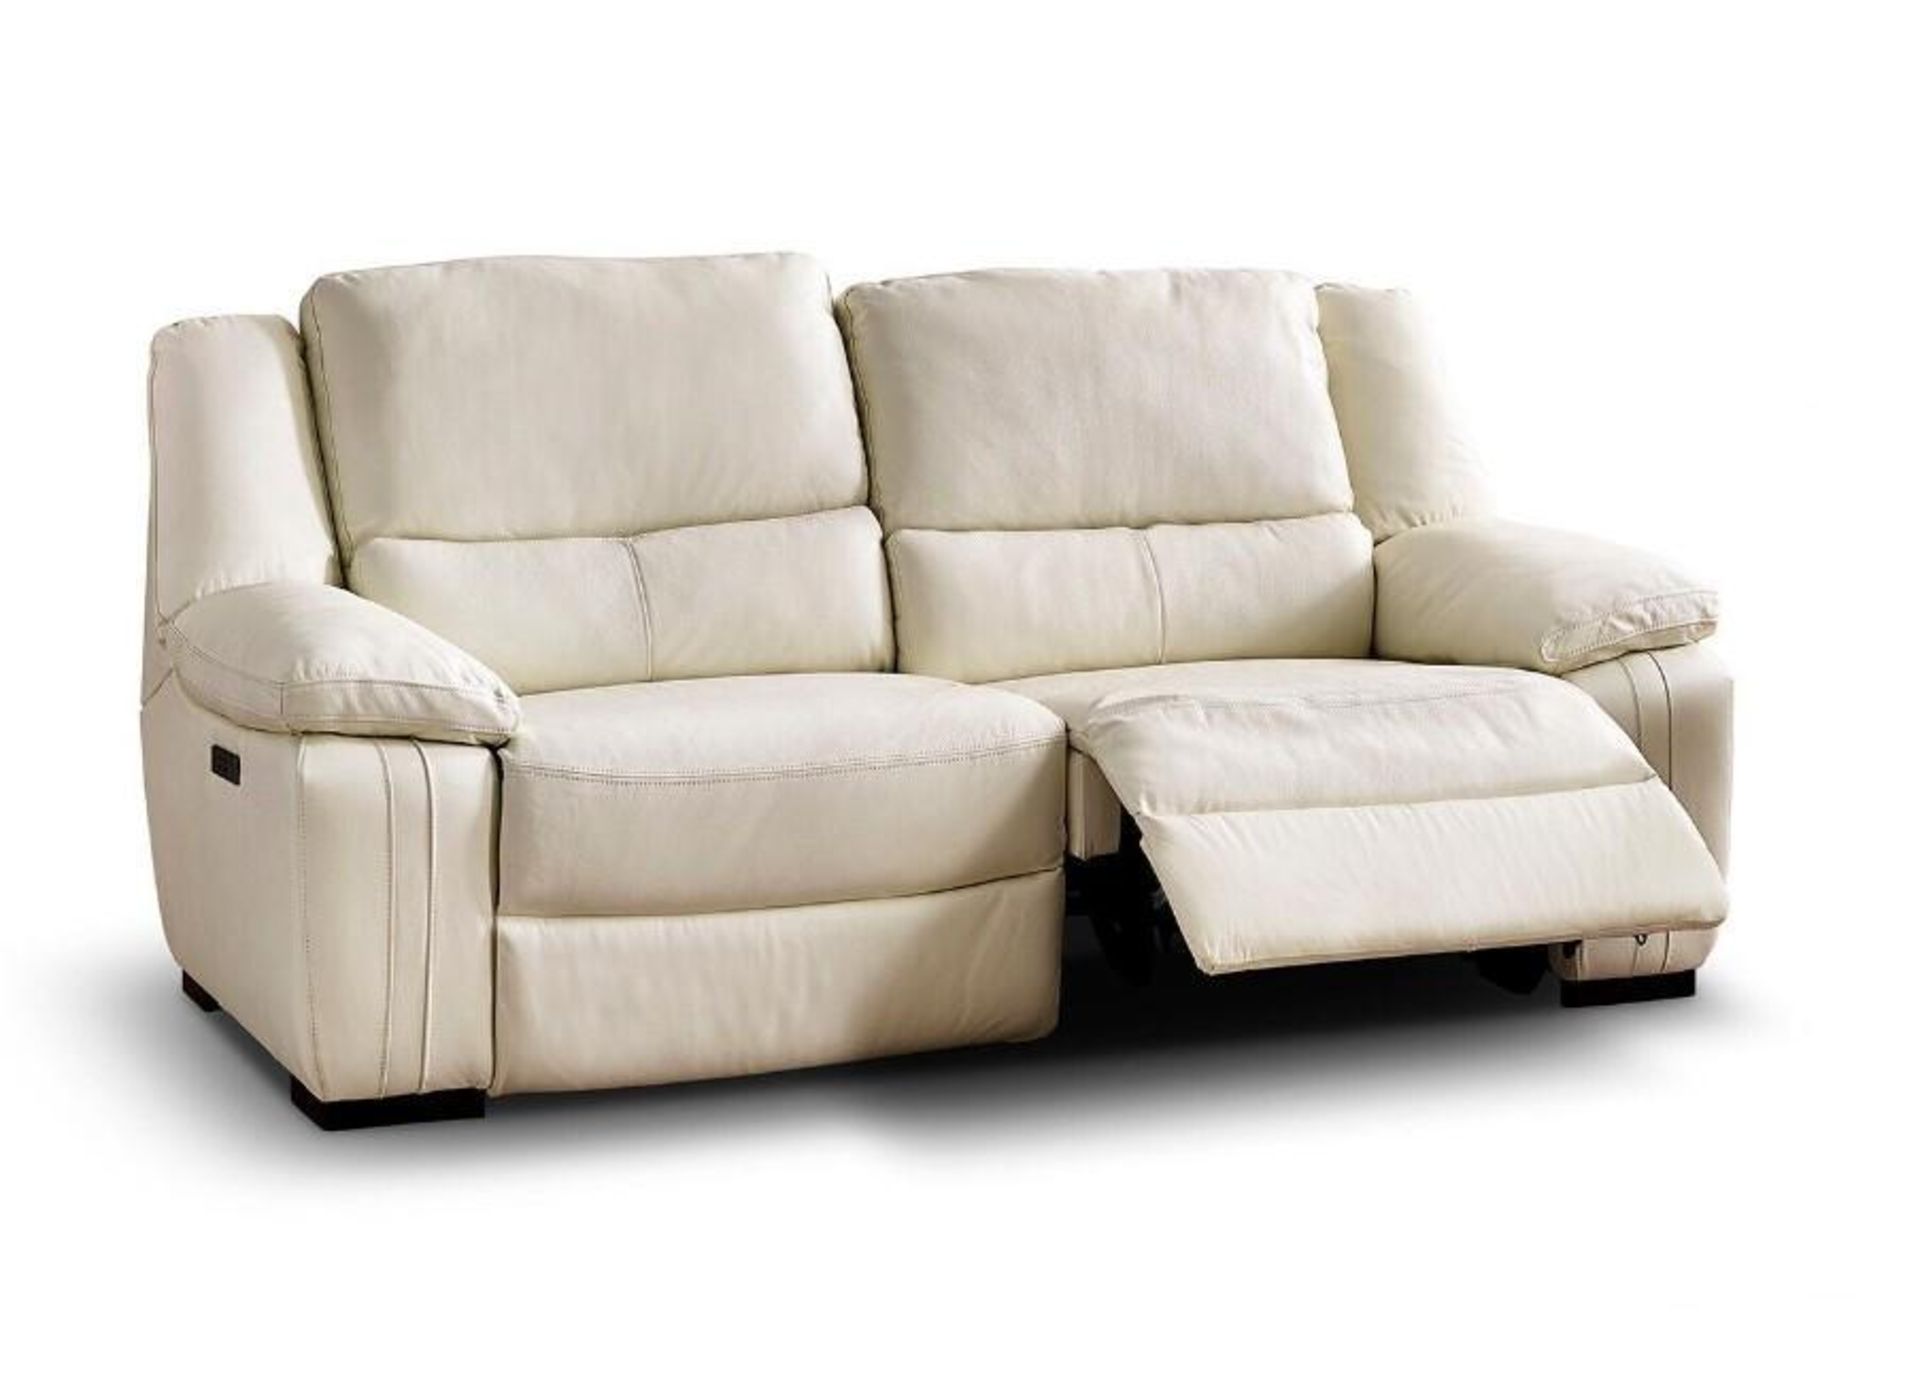 Brand new and boxed SCS Fallon 2 seater electric reclining sofa in Cream. - Image 6 of 7